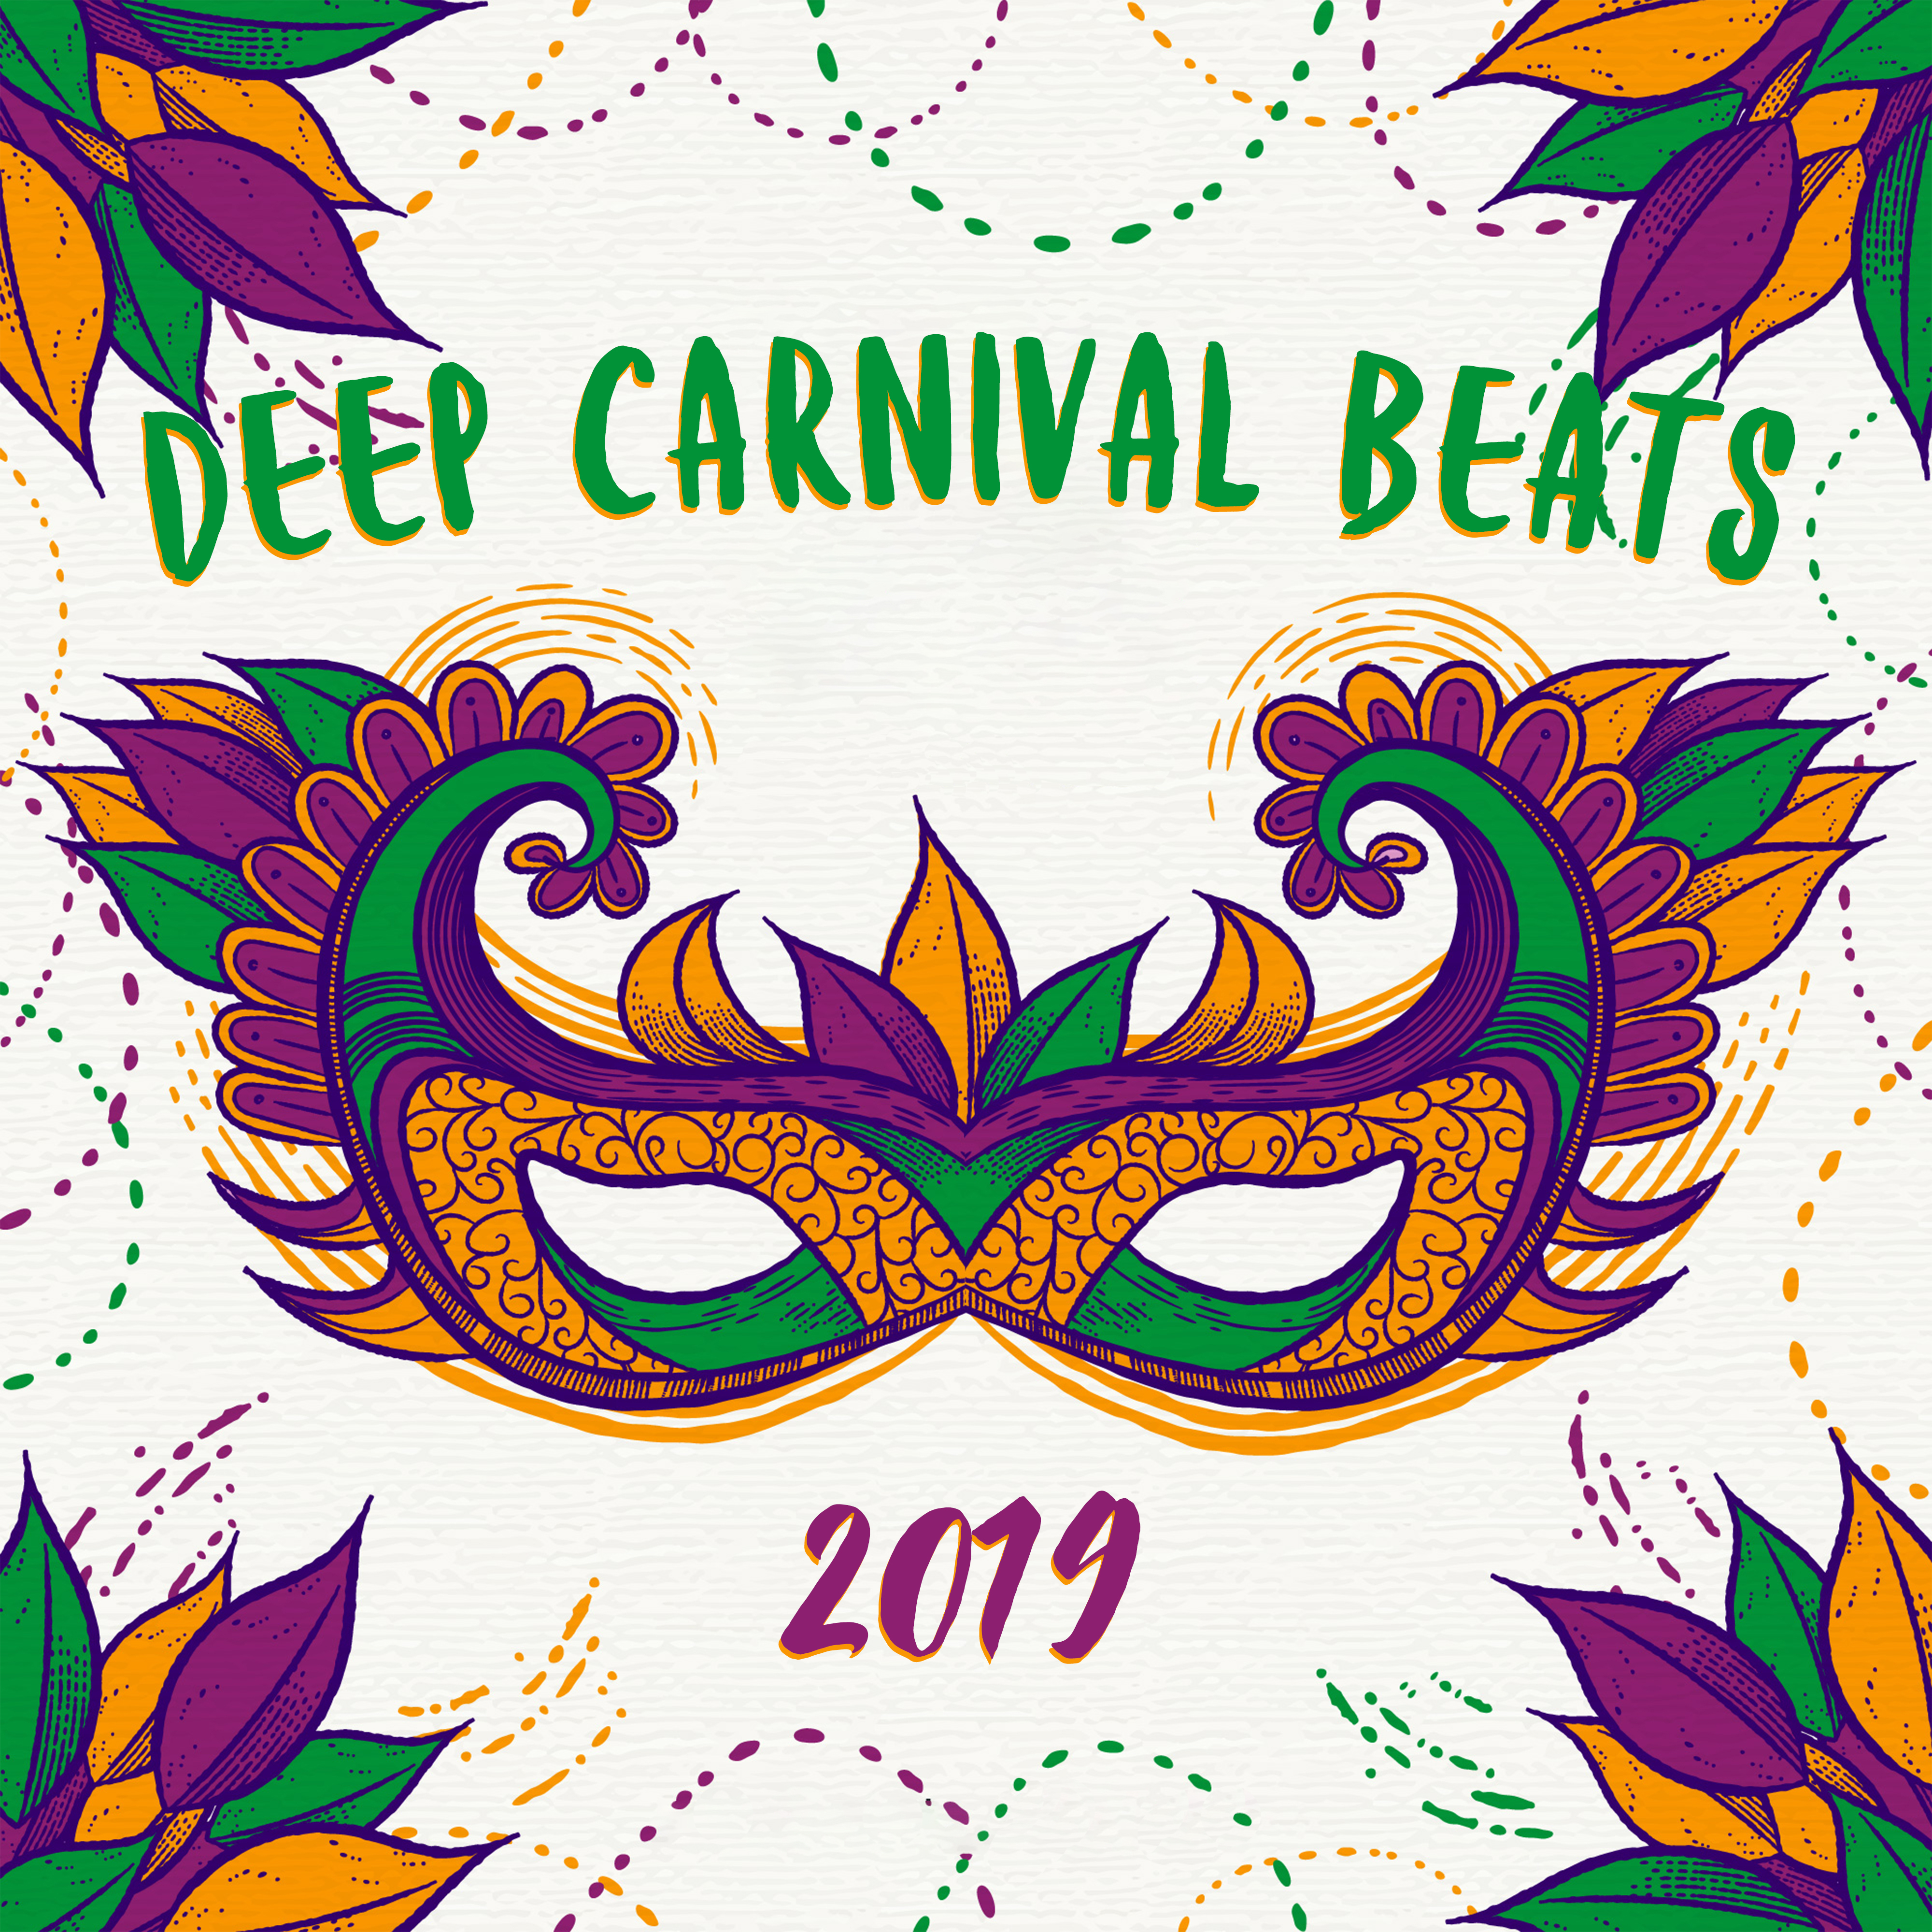 Deep Carnival Beats 2019 – Carnival Chillout 2019, **** Vibes, Dance Music, Carnival Party 2019, Chillout Lounge